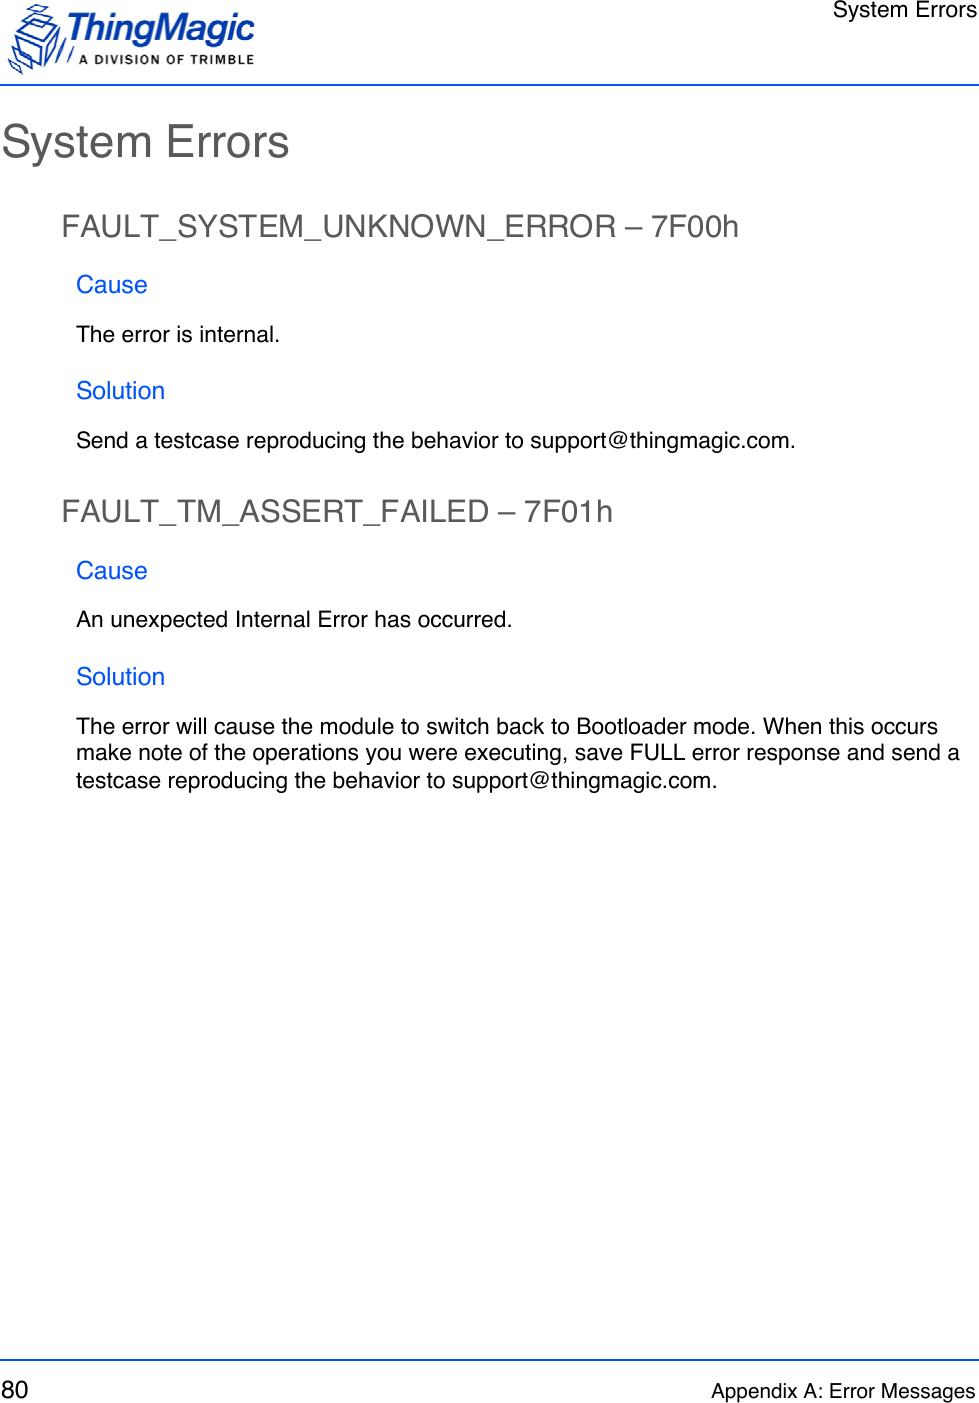 System Errors80 Appendix A: Error MessagesSystem ErrorsFAULT_SYSTEM_UNKNOWN_ERROR – 7F00hCauseThe error is internal.SolutionSend a testcase reproducing the behavior to support@thingmagic.com.FAULT_TM_ASSERT_FAILED – 7F01hCauseAn unexpected Internal Error has occurred.SolutionThe error will cause the module to switch back to Bootloader mode. When this occurs make note of the operations you were executing, save FULL error response and send a testcase reproducing the behavior to support@thingmagic.com.